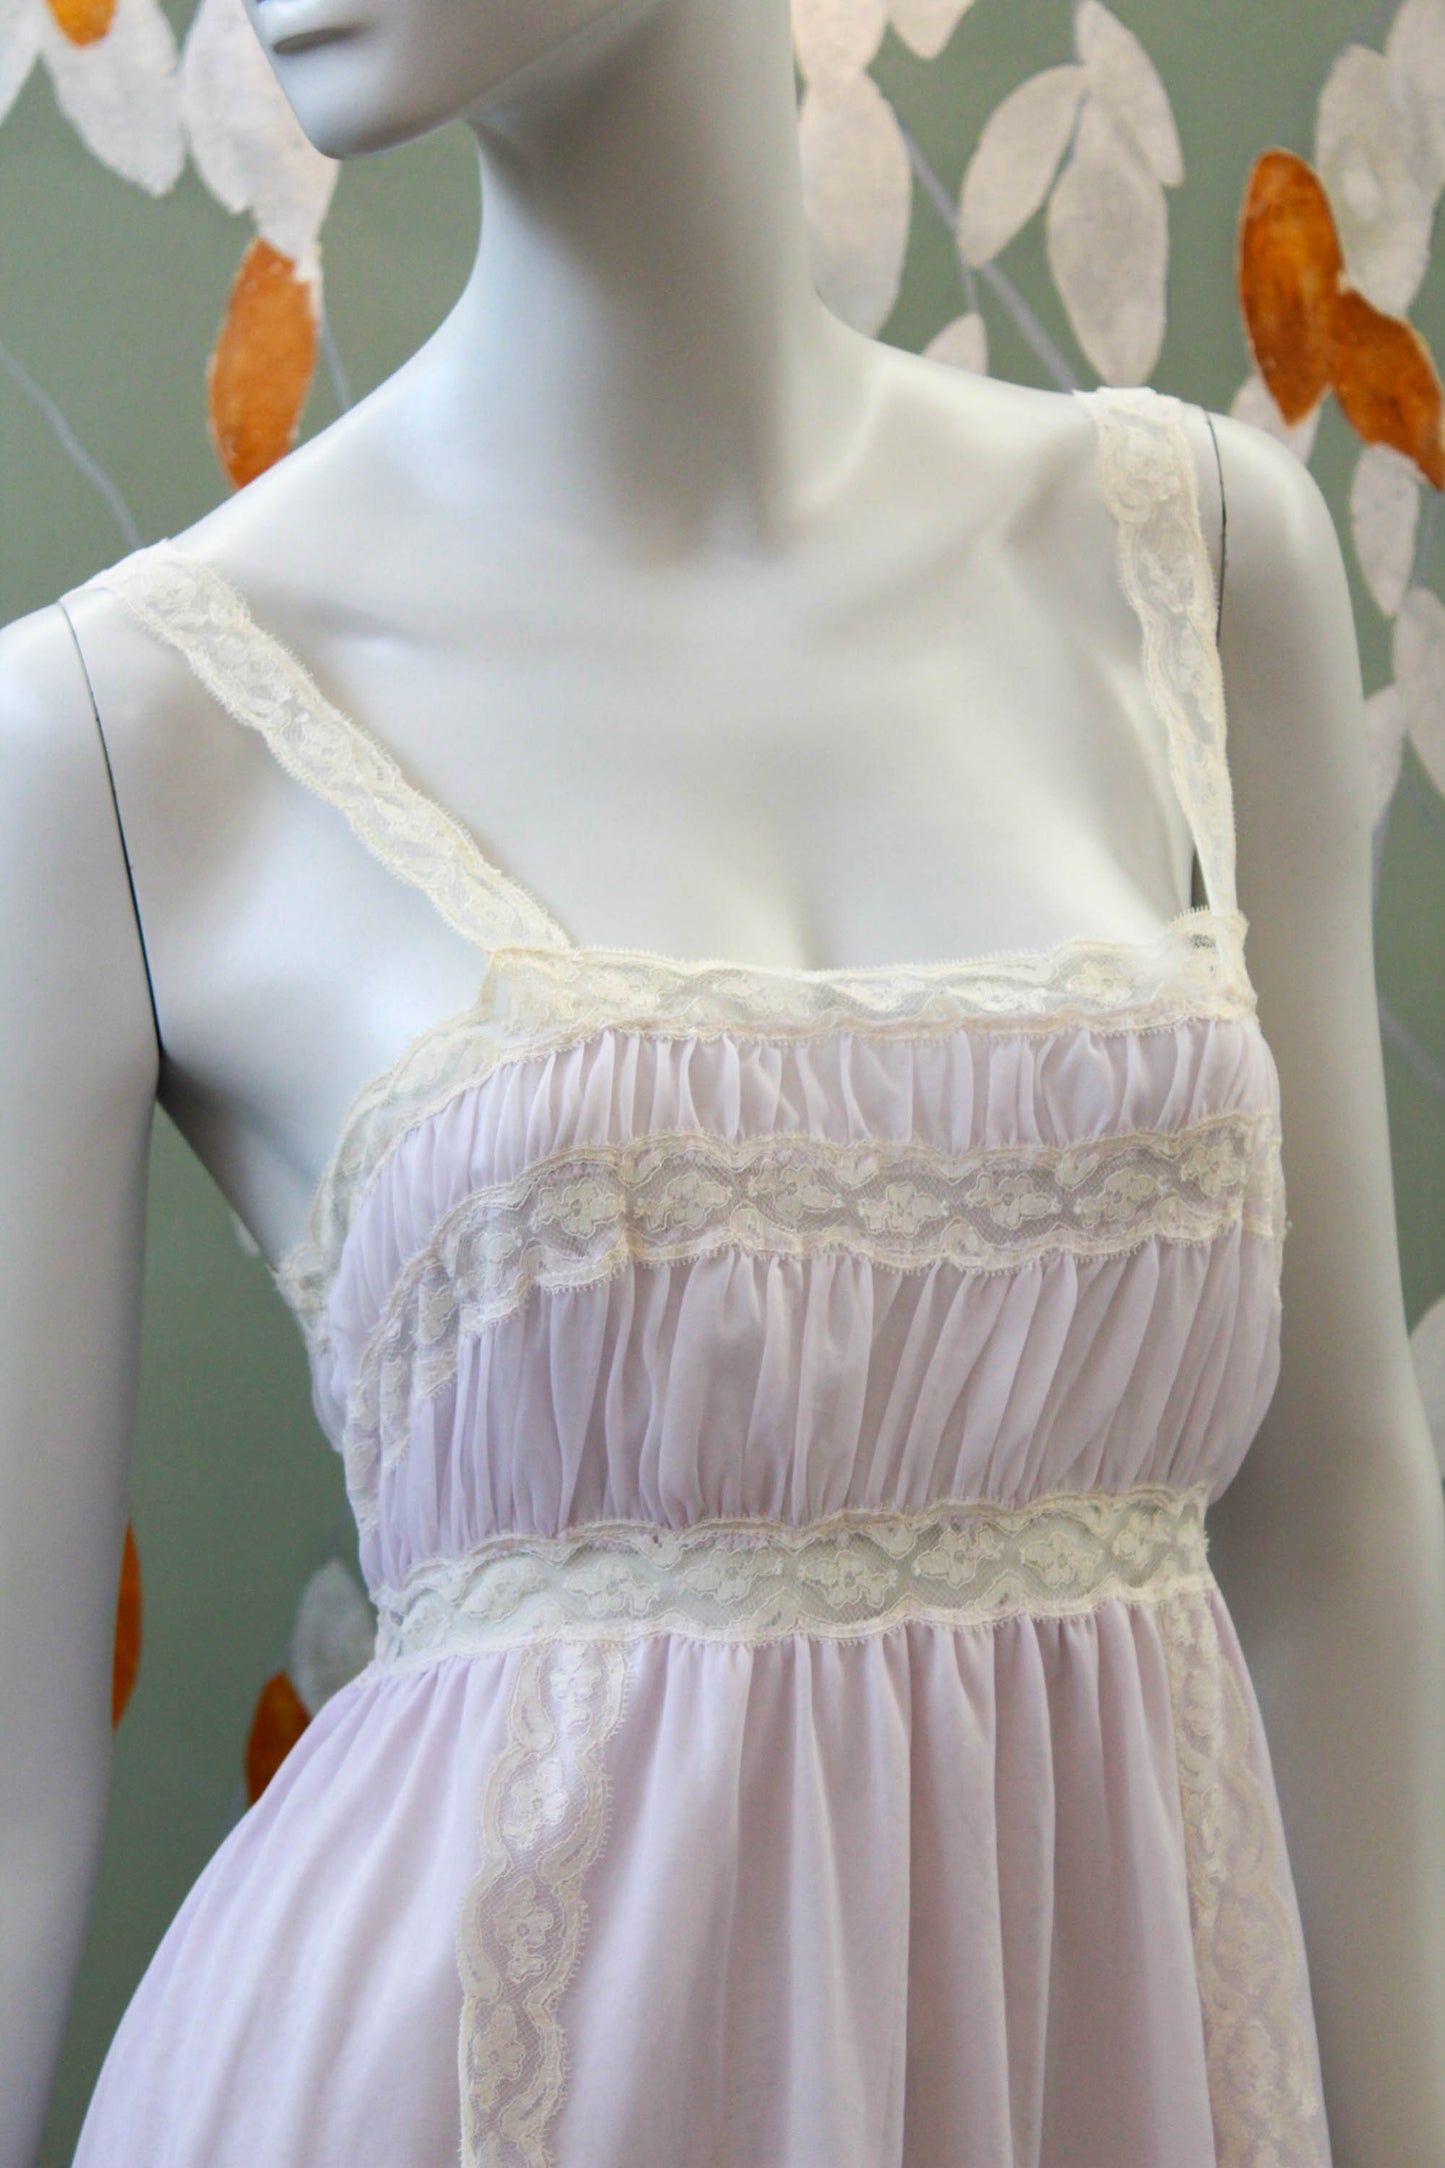 1960s pale lilac slip nightgown with lace straps and insets and trim, satin ribbon waist tie, coquette romantic aesthetic feminine vintage dressing gown